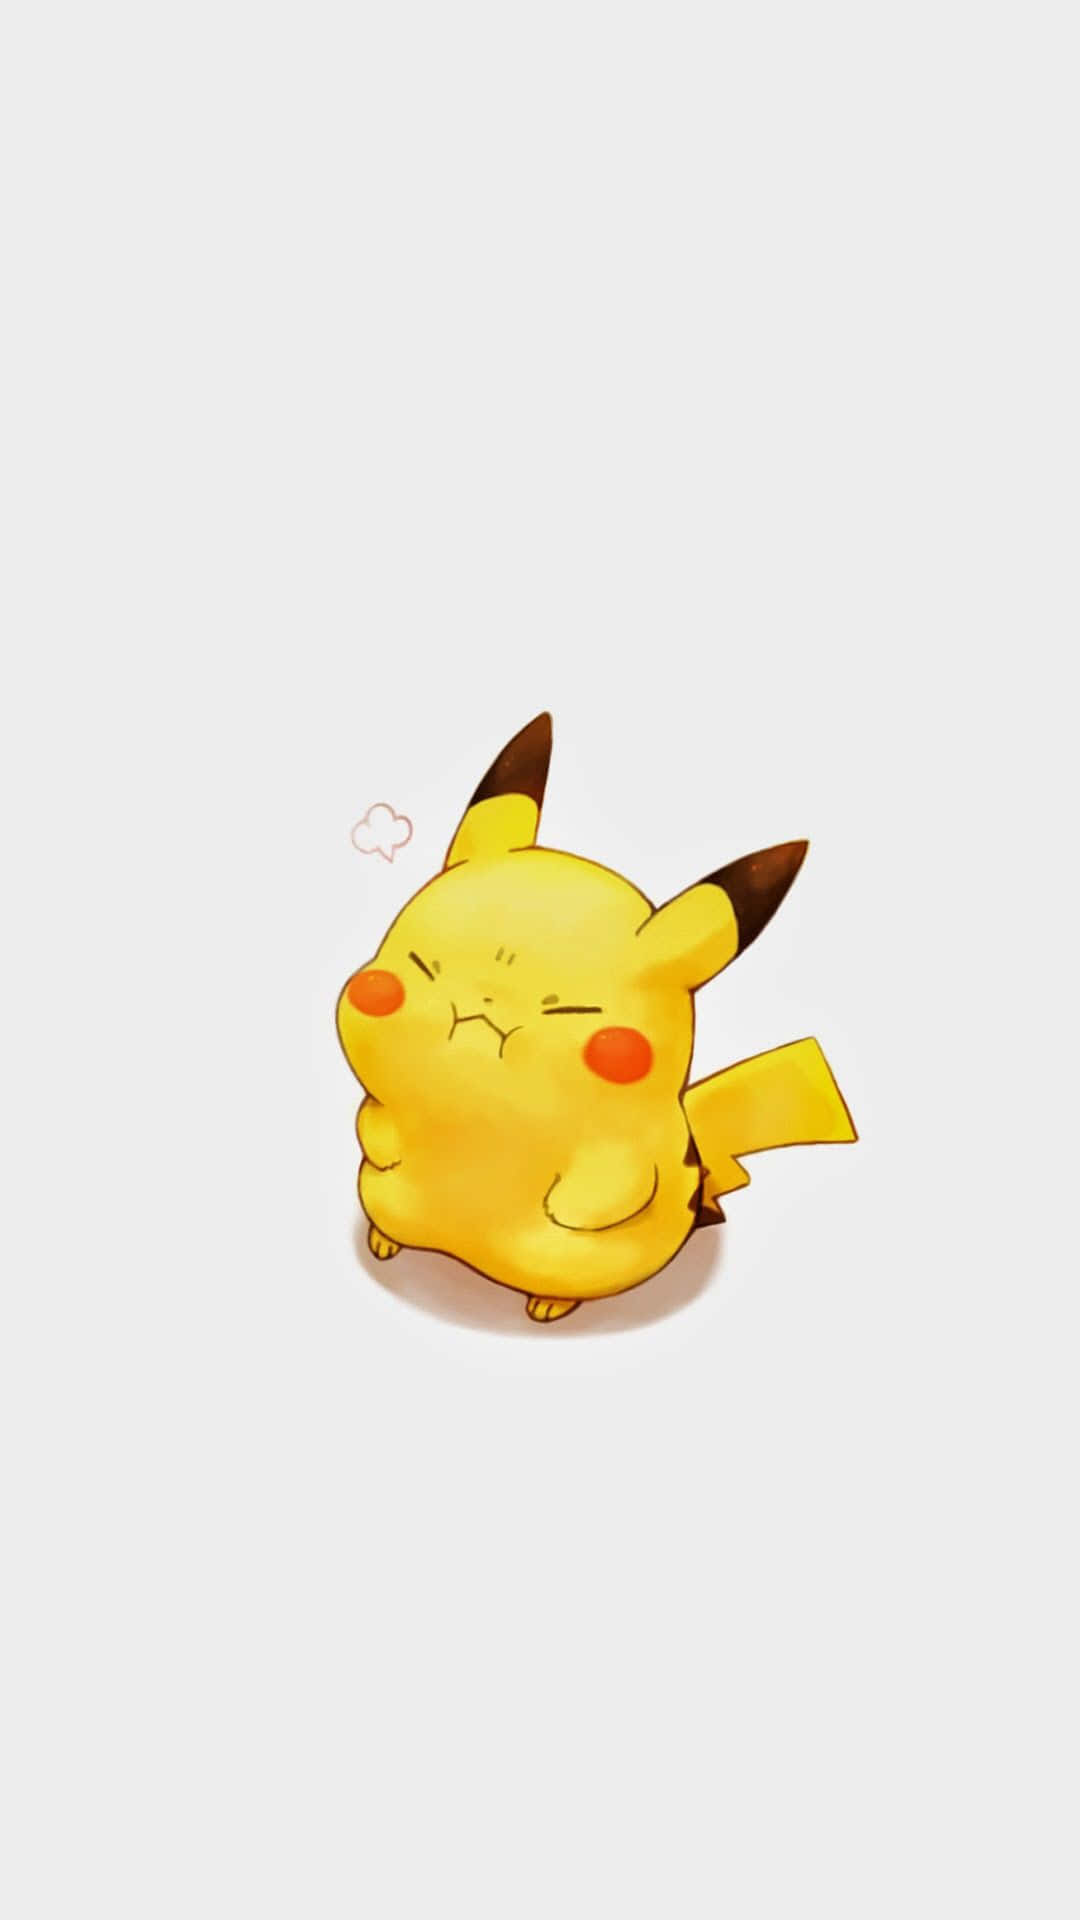 Pikachu iPhone Wallpaper with high-resolution 1080x1920 pixel. You can use this wallpaper for your iPhone 5, 6, 7, 8, X, XS, XR backgrounds, Mobile Screensaver, or iPad Lock Screen - Pokemon